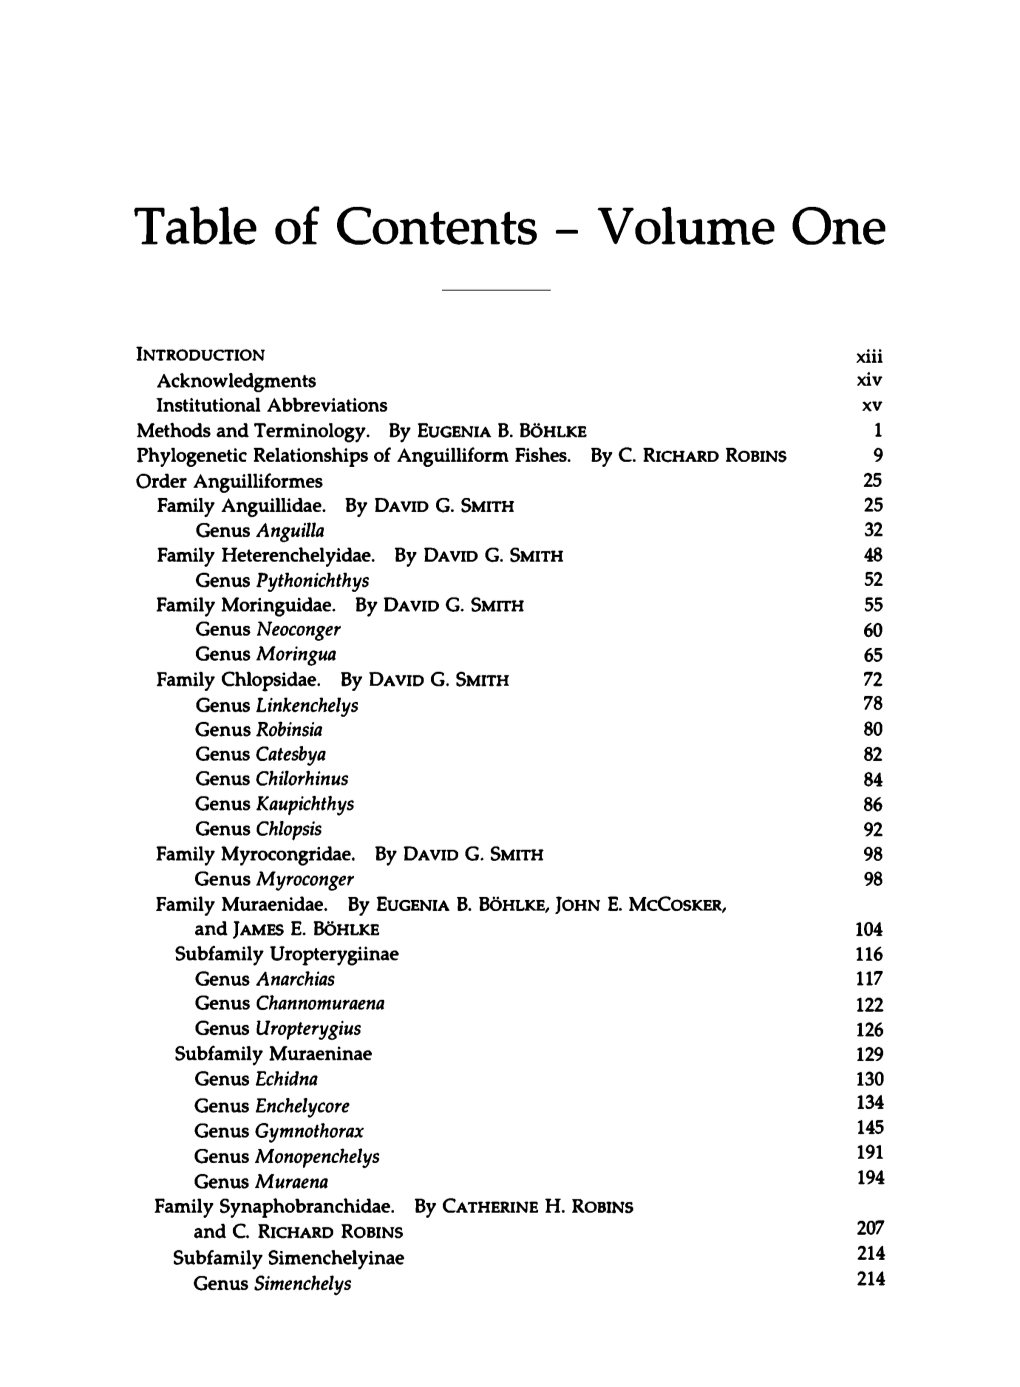 Table of Contents - Volume One